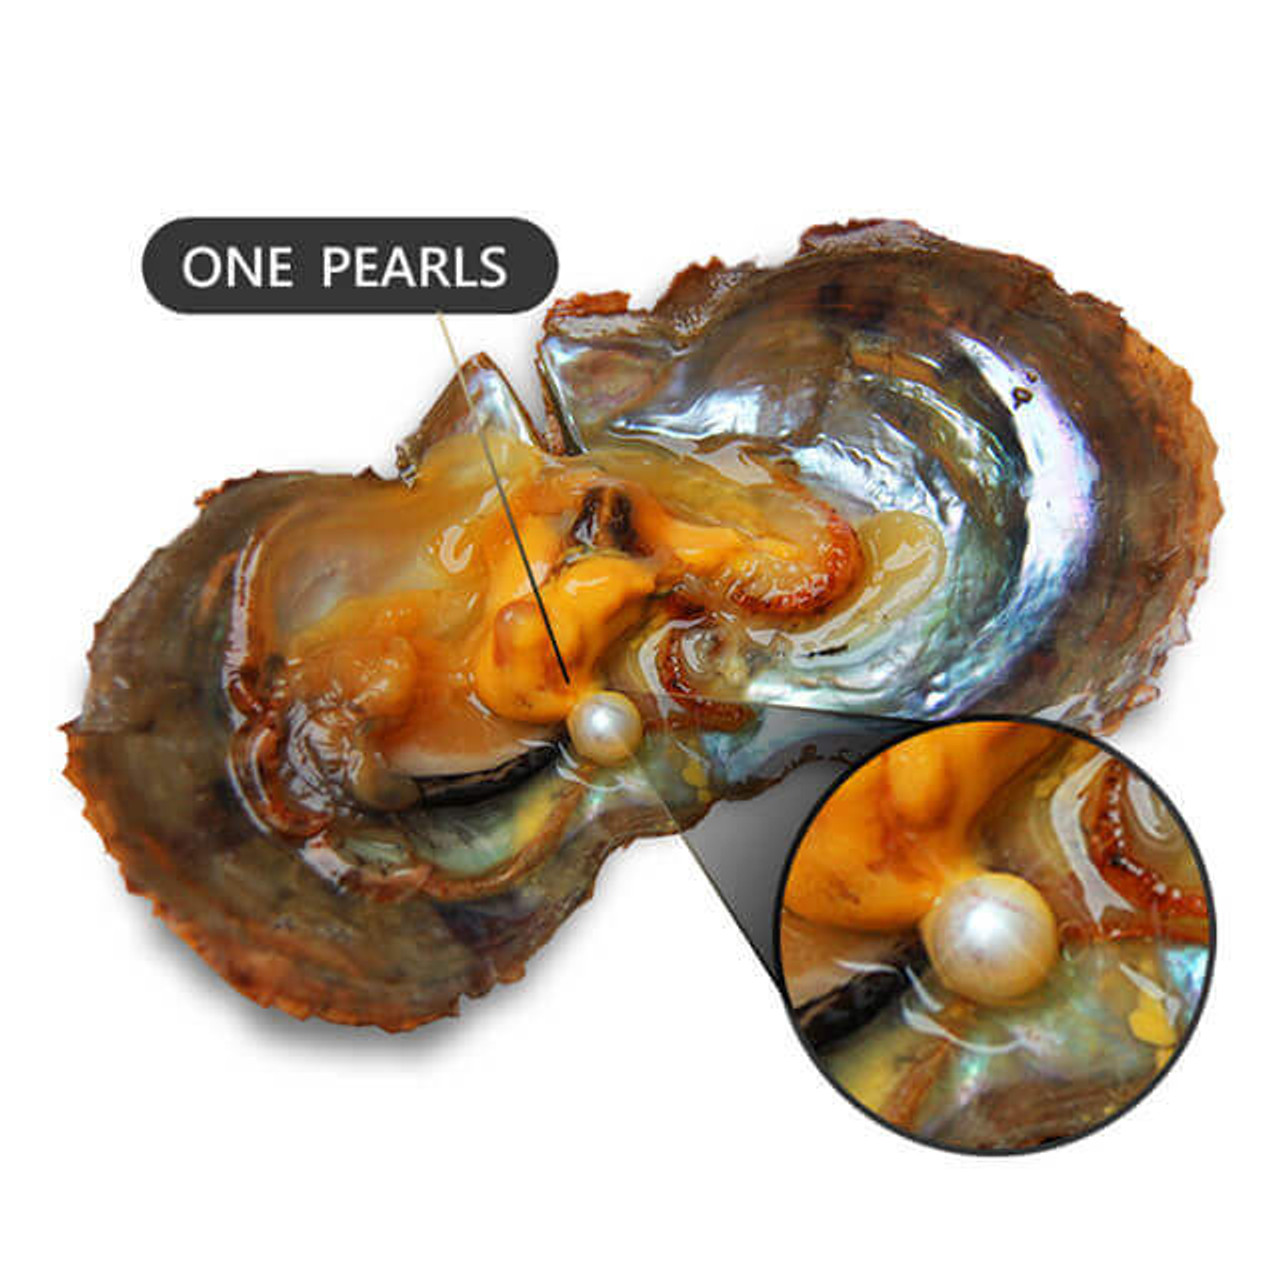 BEST BRIGHTEST REAL PEARLS FOUND IN REAL OYSTERS 